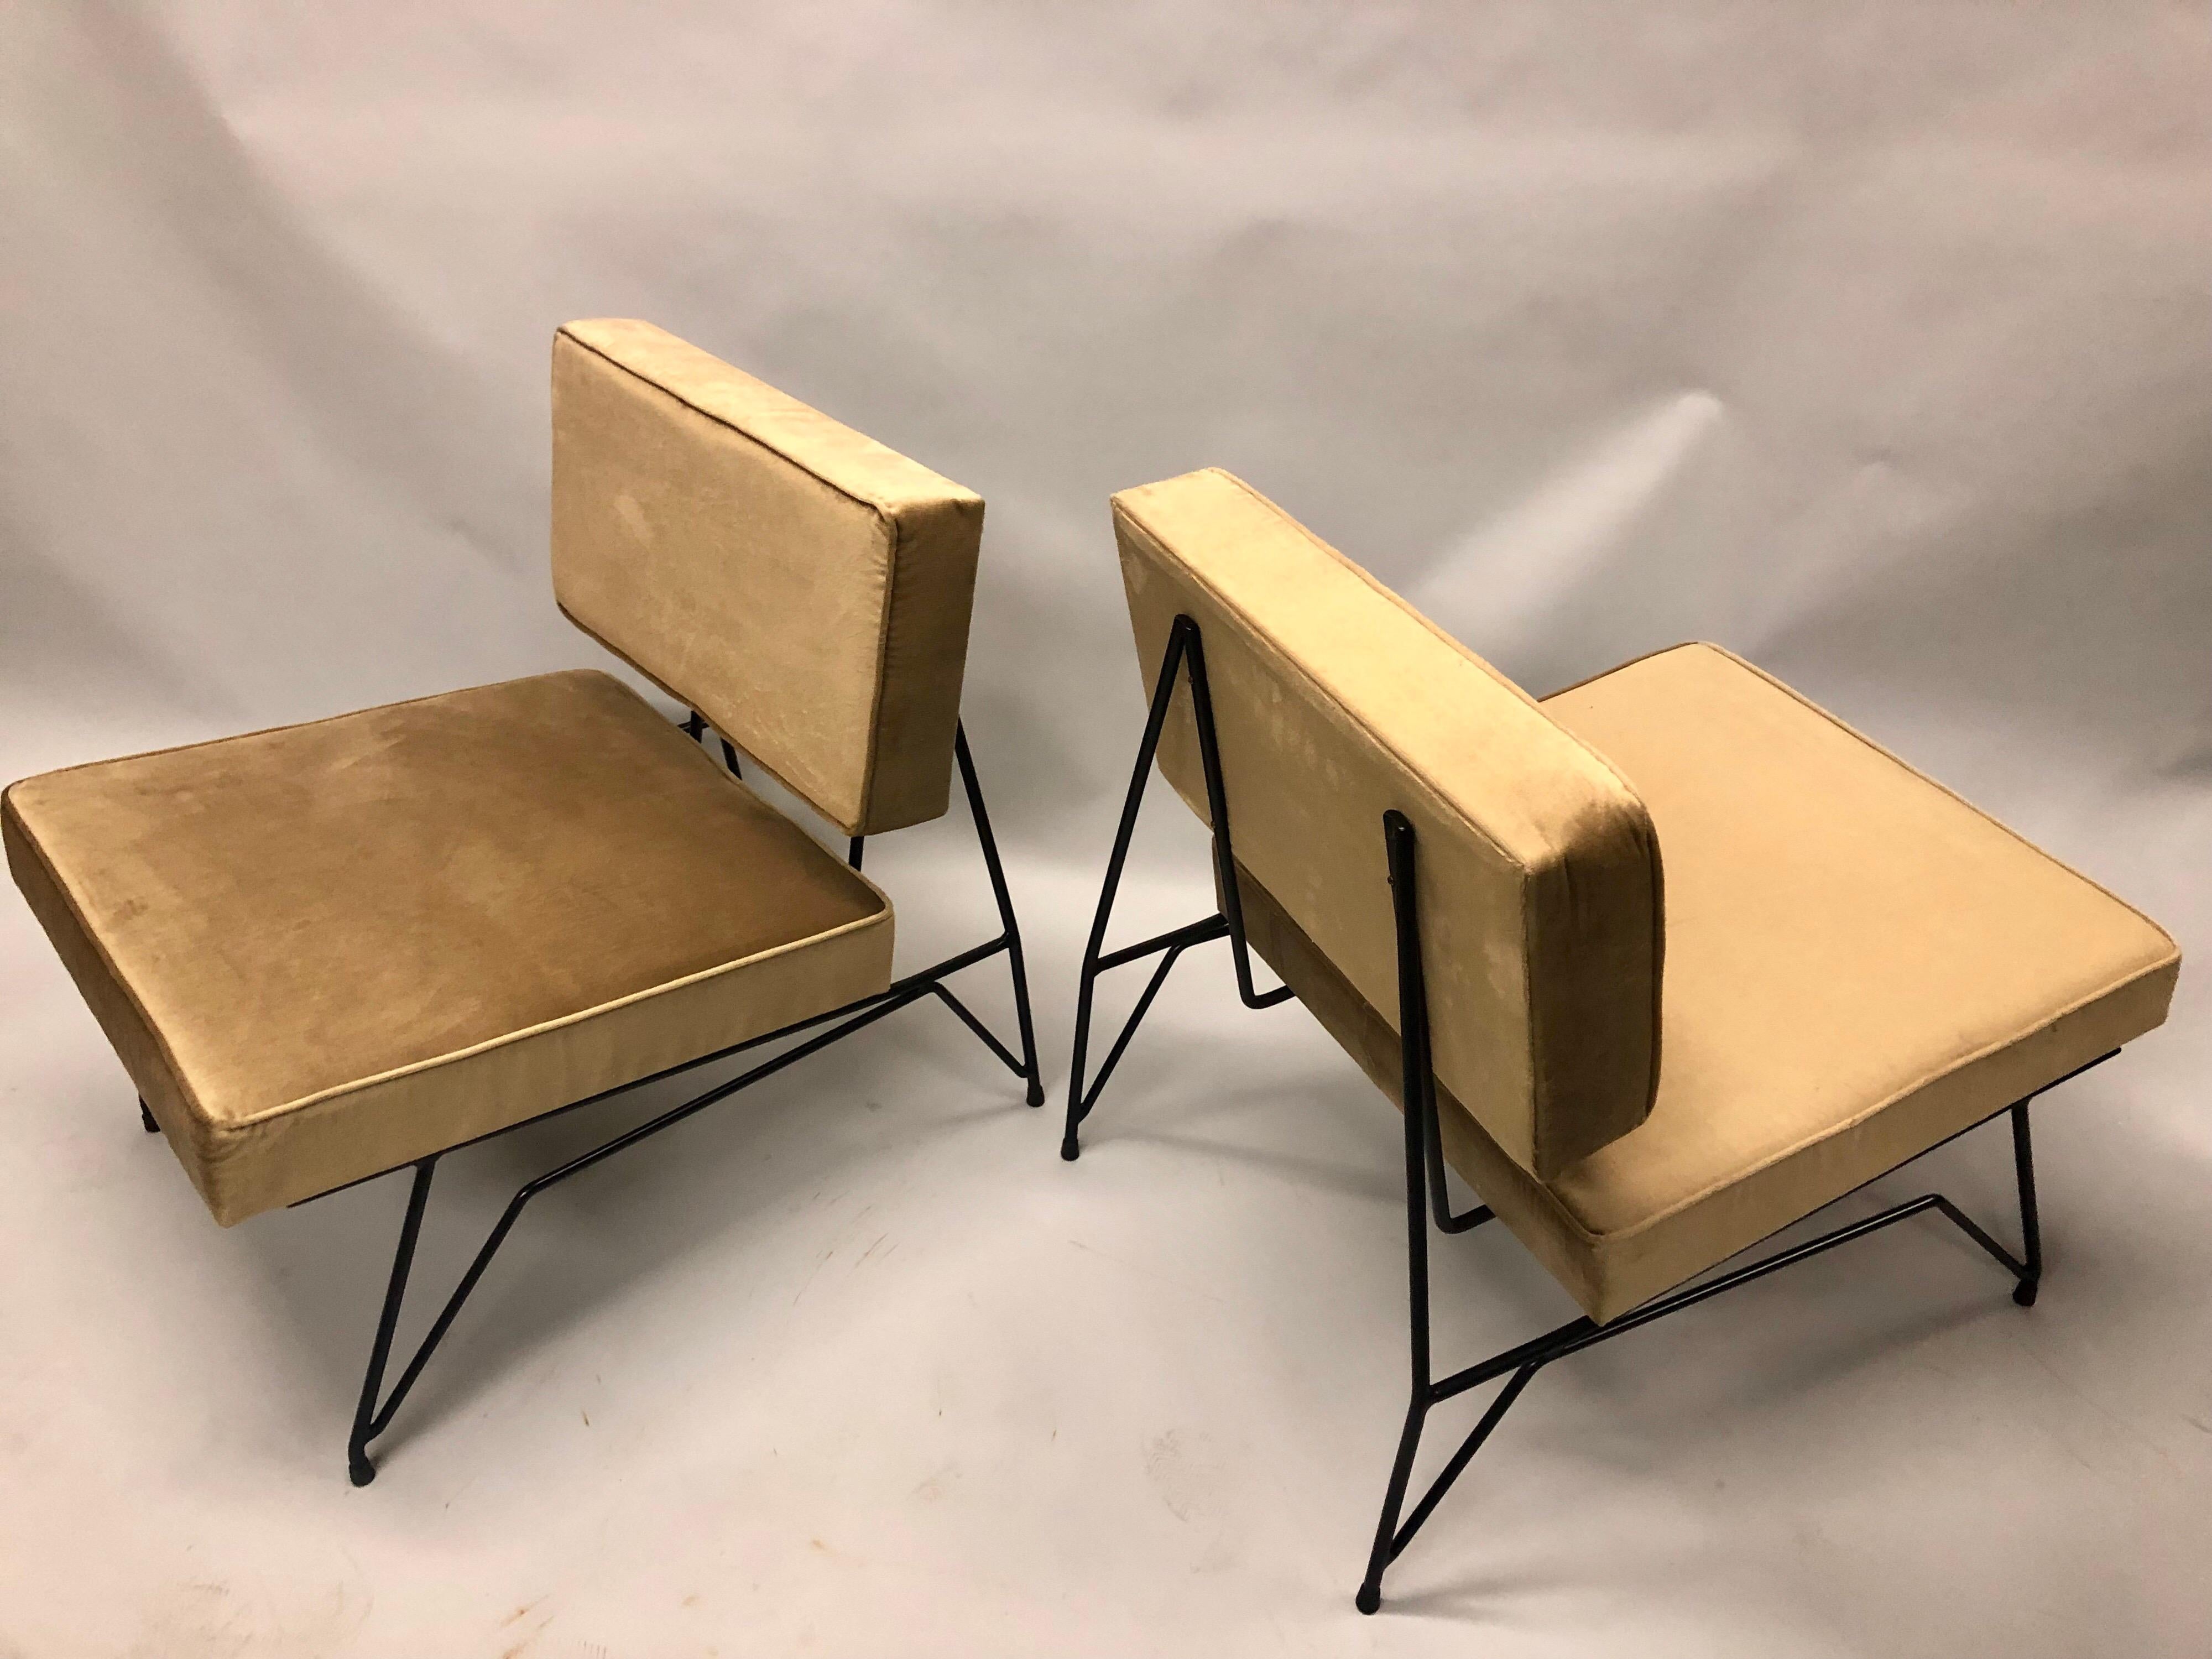 Elegant pair of Italian Mid-Century Modern, cantilevered lounge chairs attributed to Augusto Bozzi. The chairs feature an innovative architectural structure and transparent aesthetic setting them apart from other chairs of the period. The